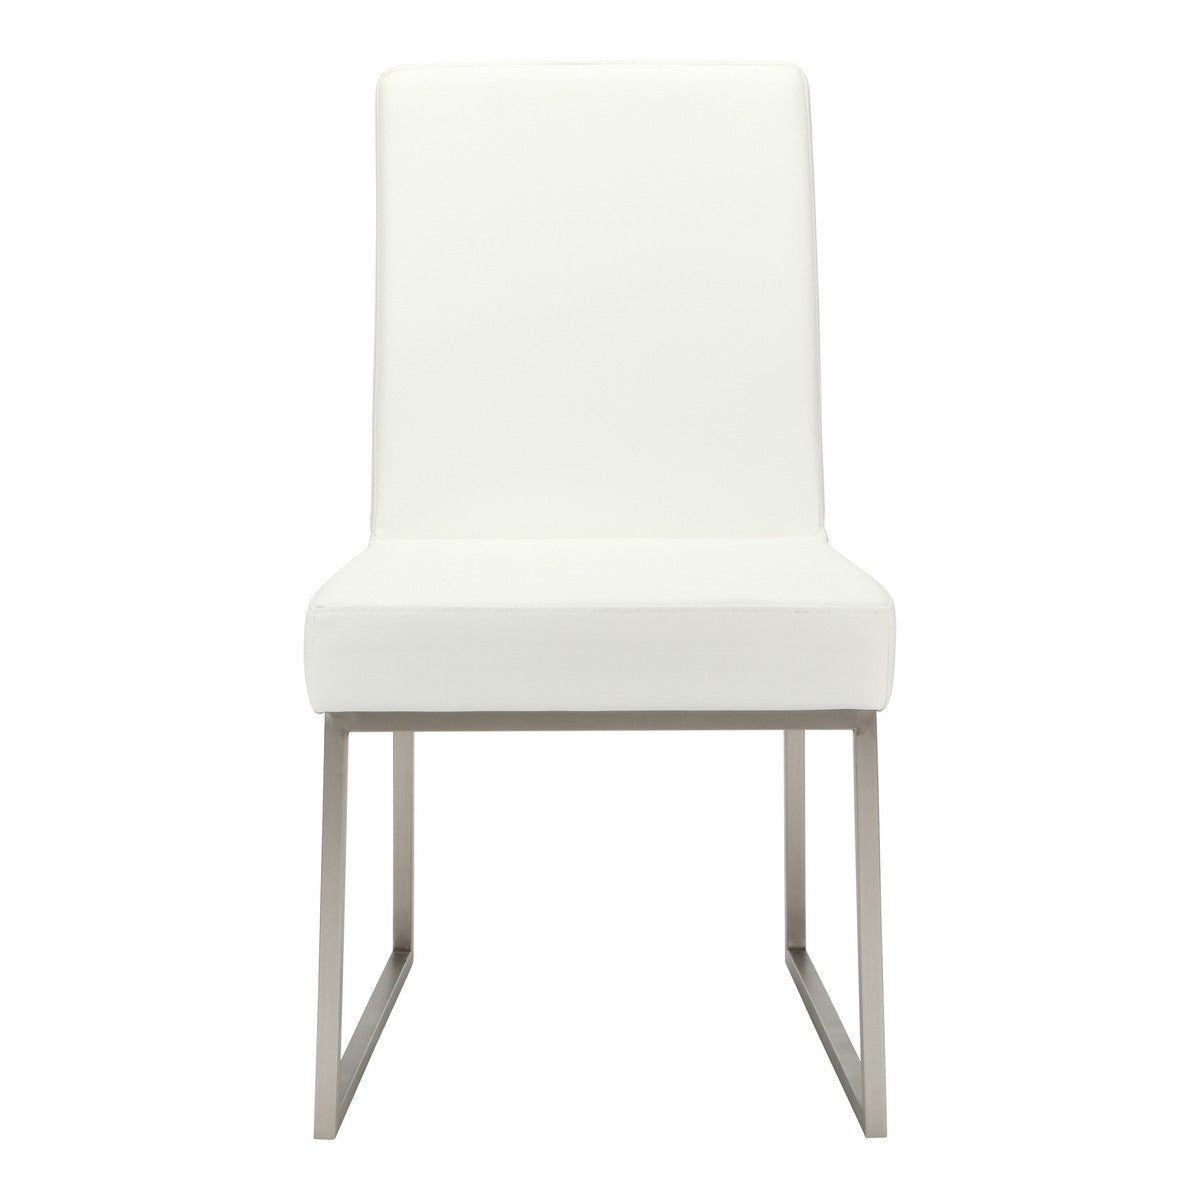 Moe's Home Collection Tyson Dining Chair White-Set of Two - ER-2012-18 - Moe's Home Collection - Dining Chairs - Minimal And Modern - 1